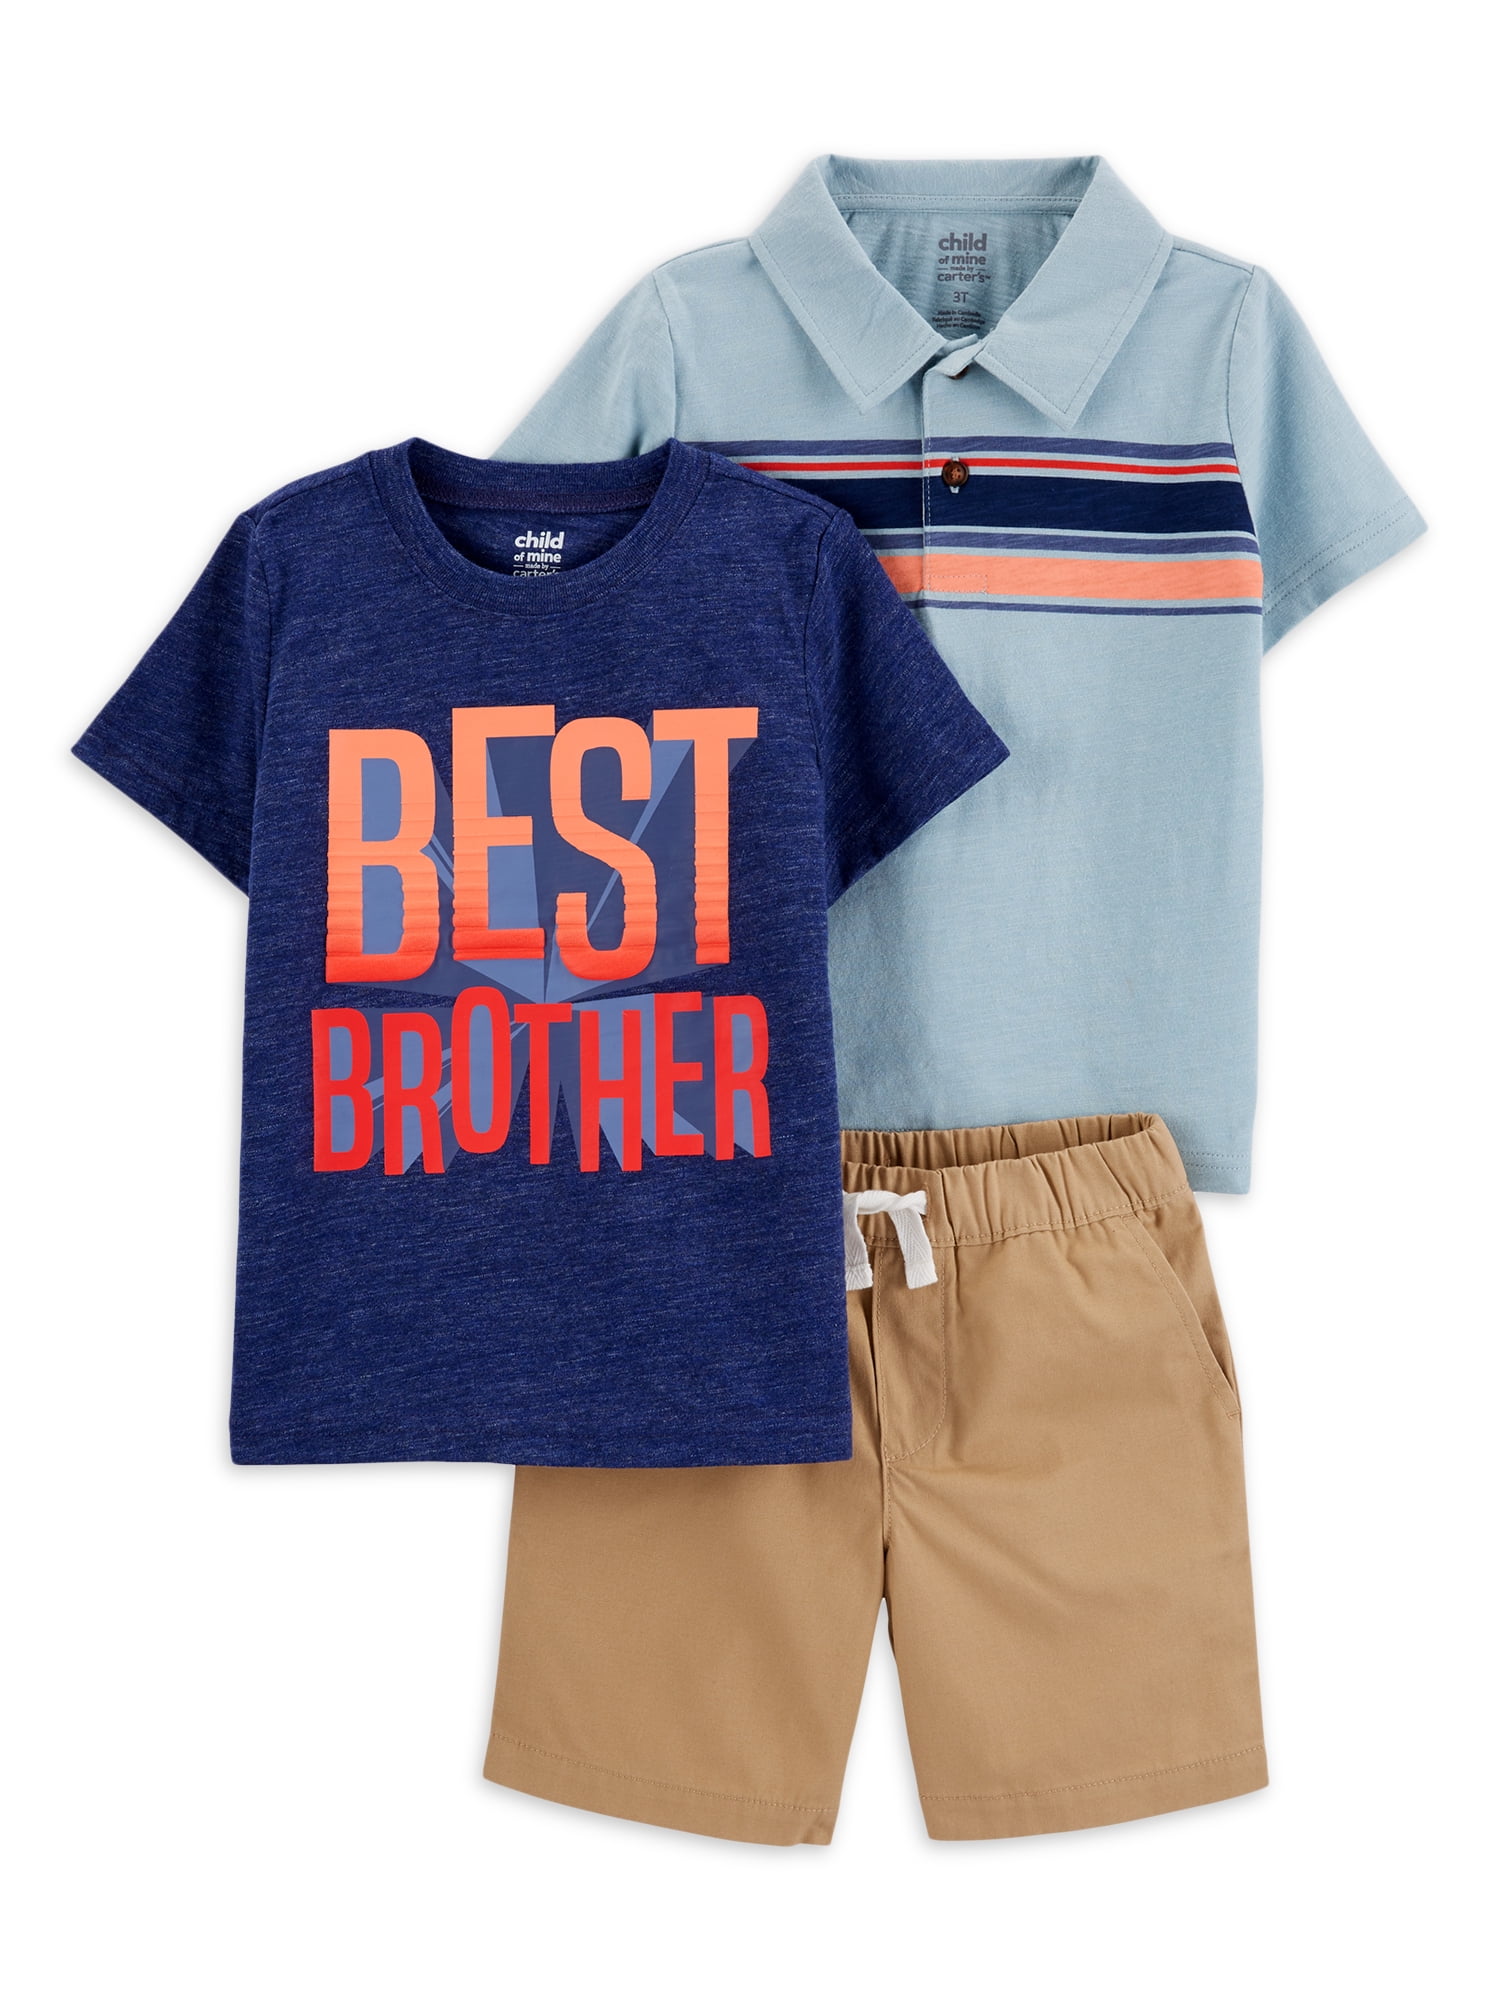 New Carter's Baby/Toddler Boys' 2-Pc Shirt & Joggers or Polo/Tee Pant Set 